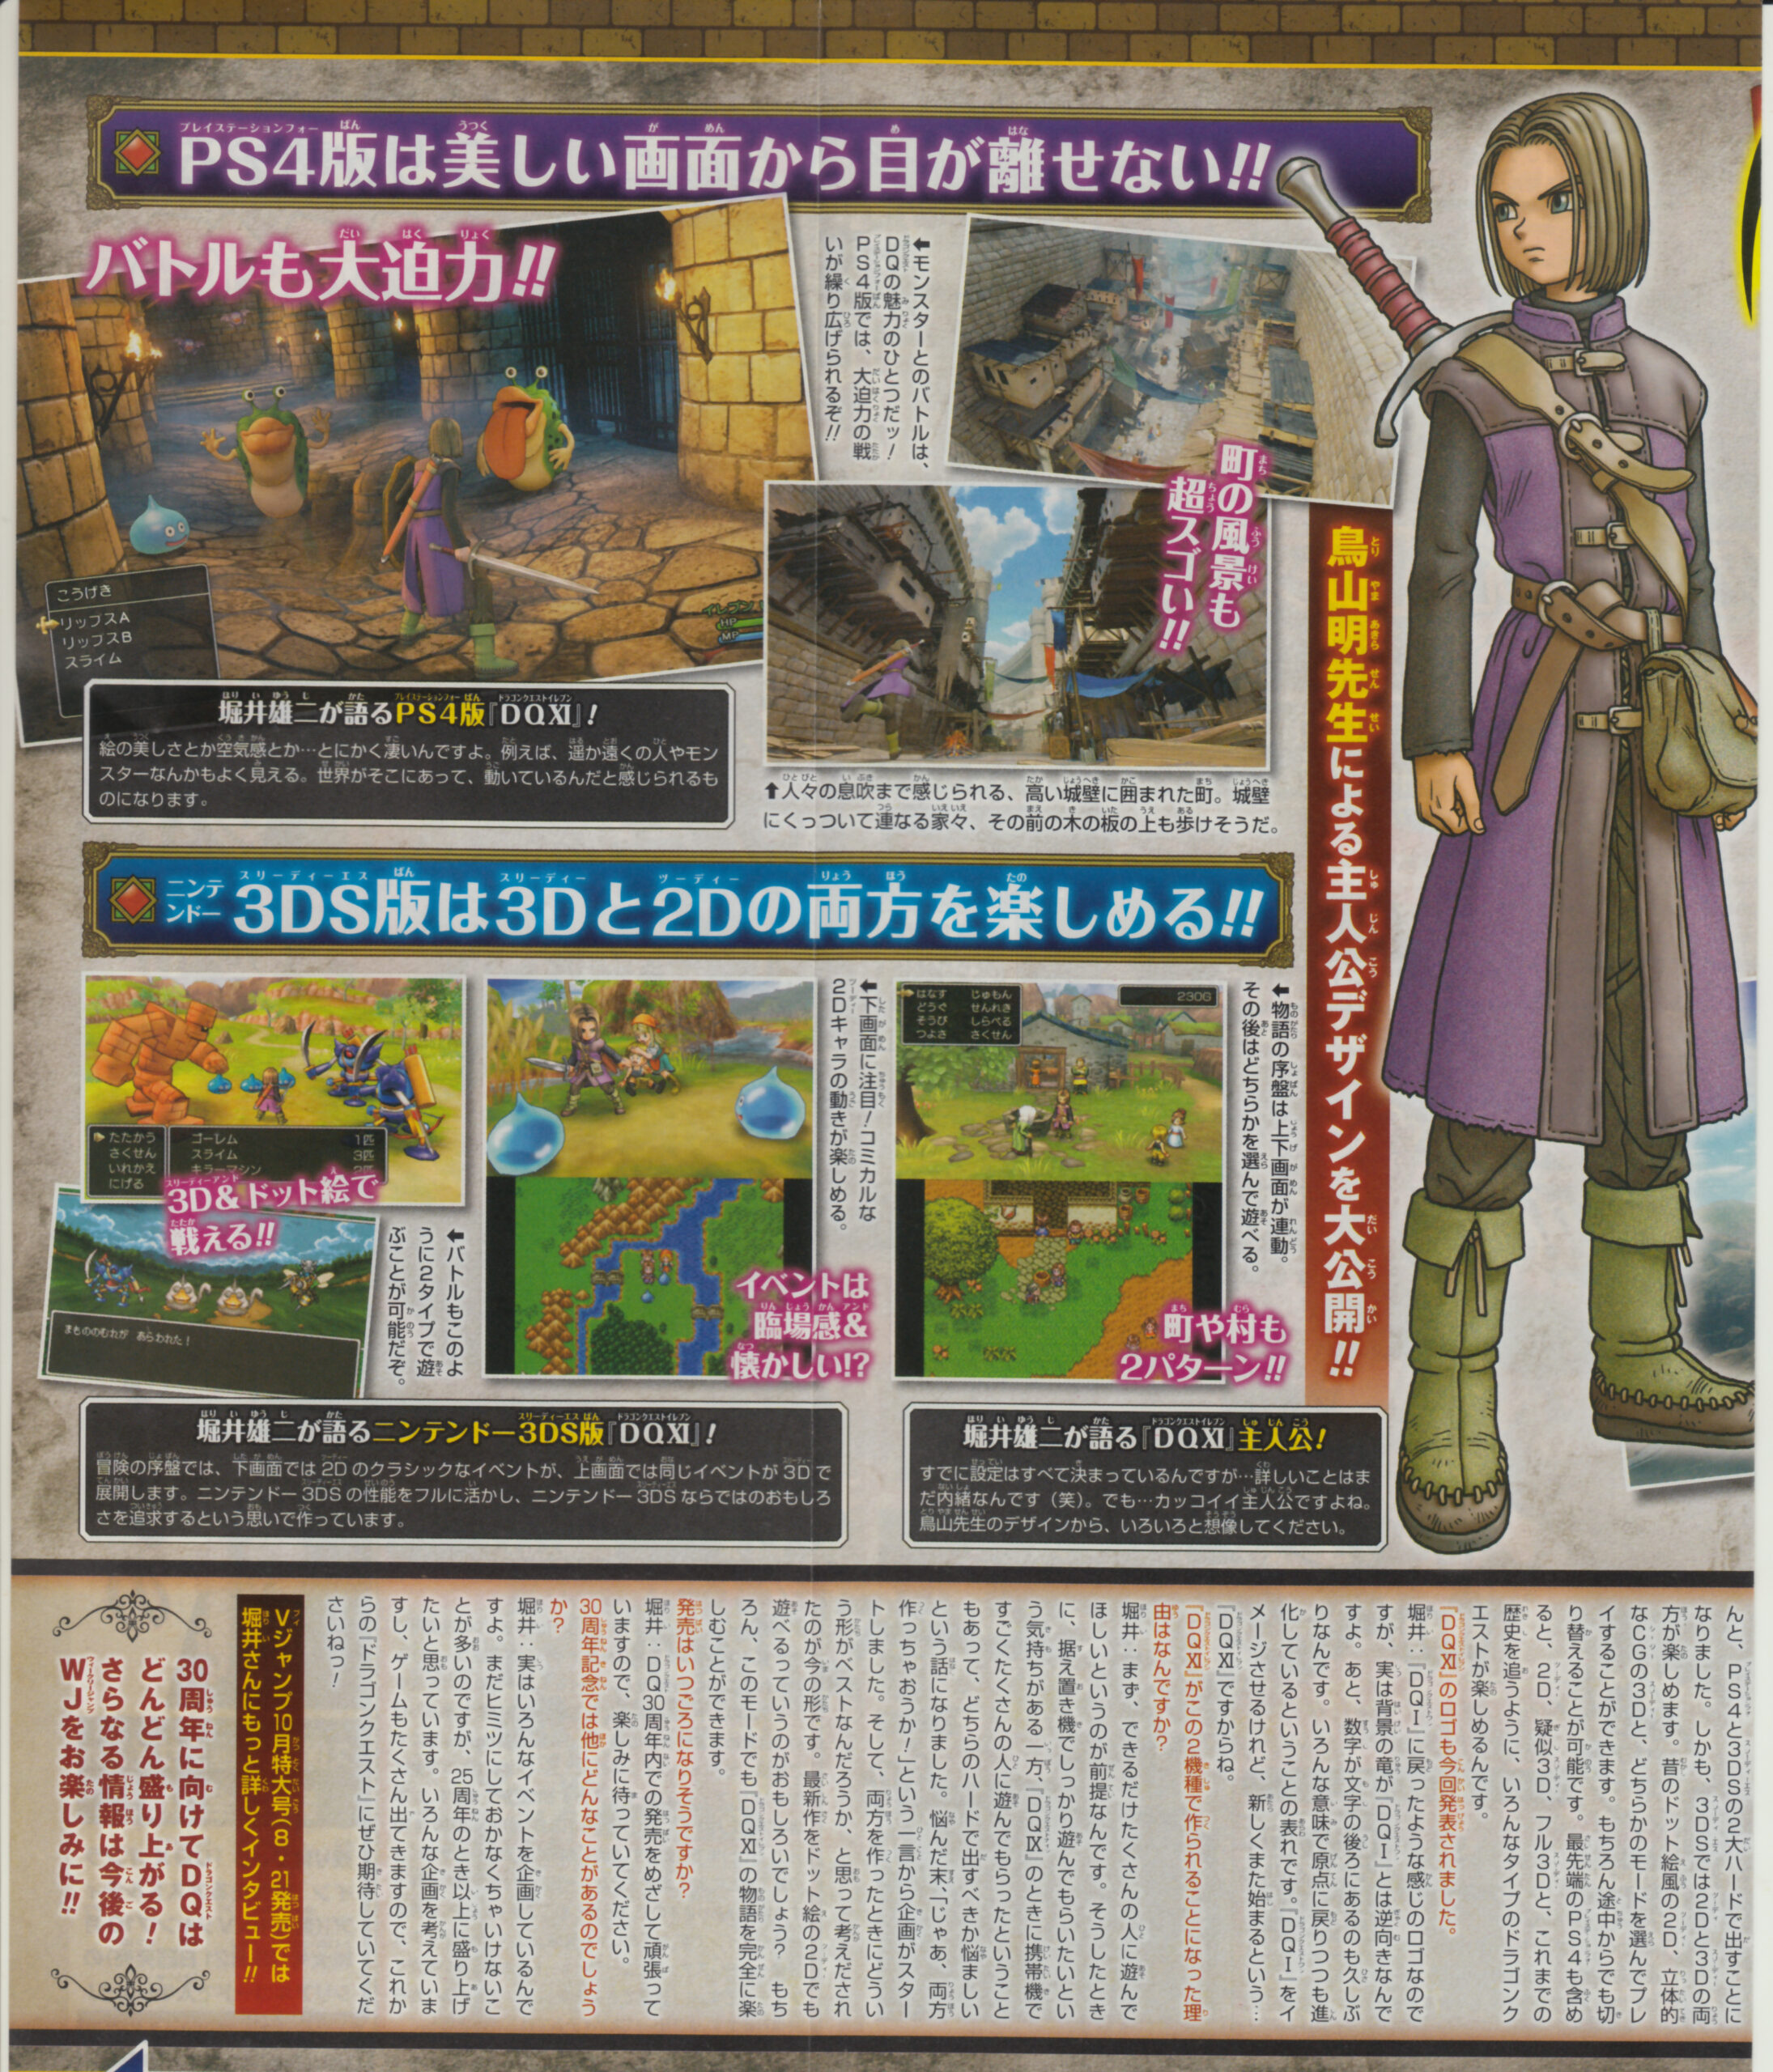 Yuji Horii Talks About Making 'Dragon Quest XI' And The Origins